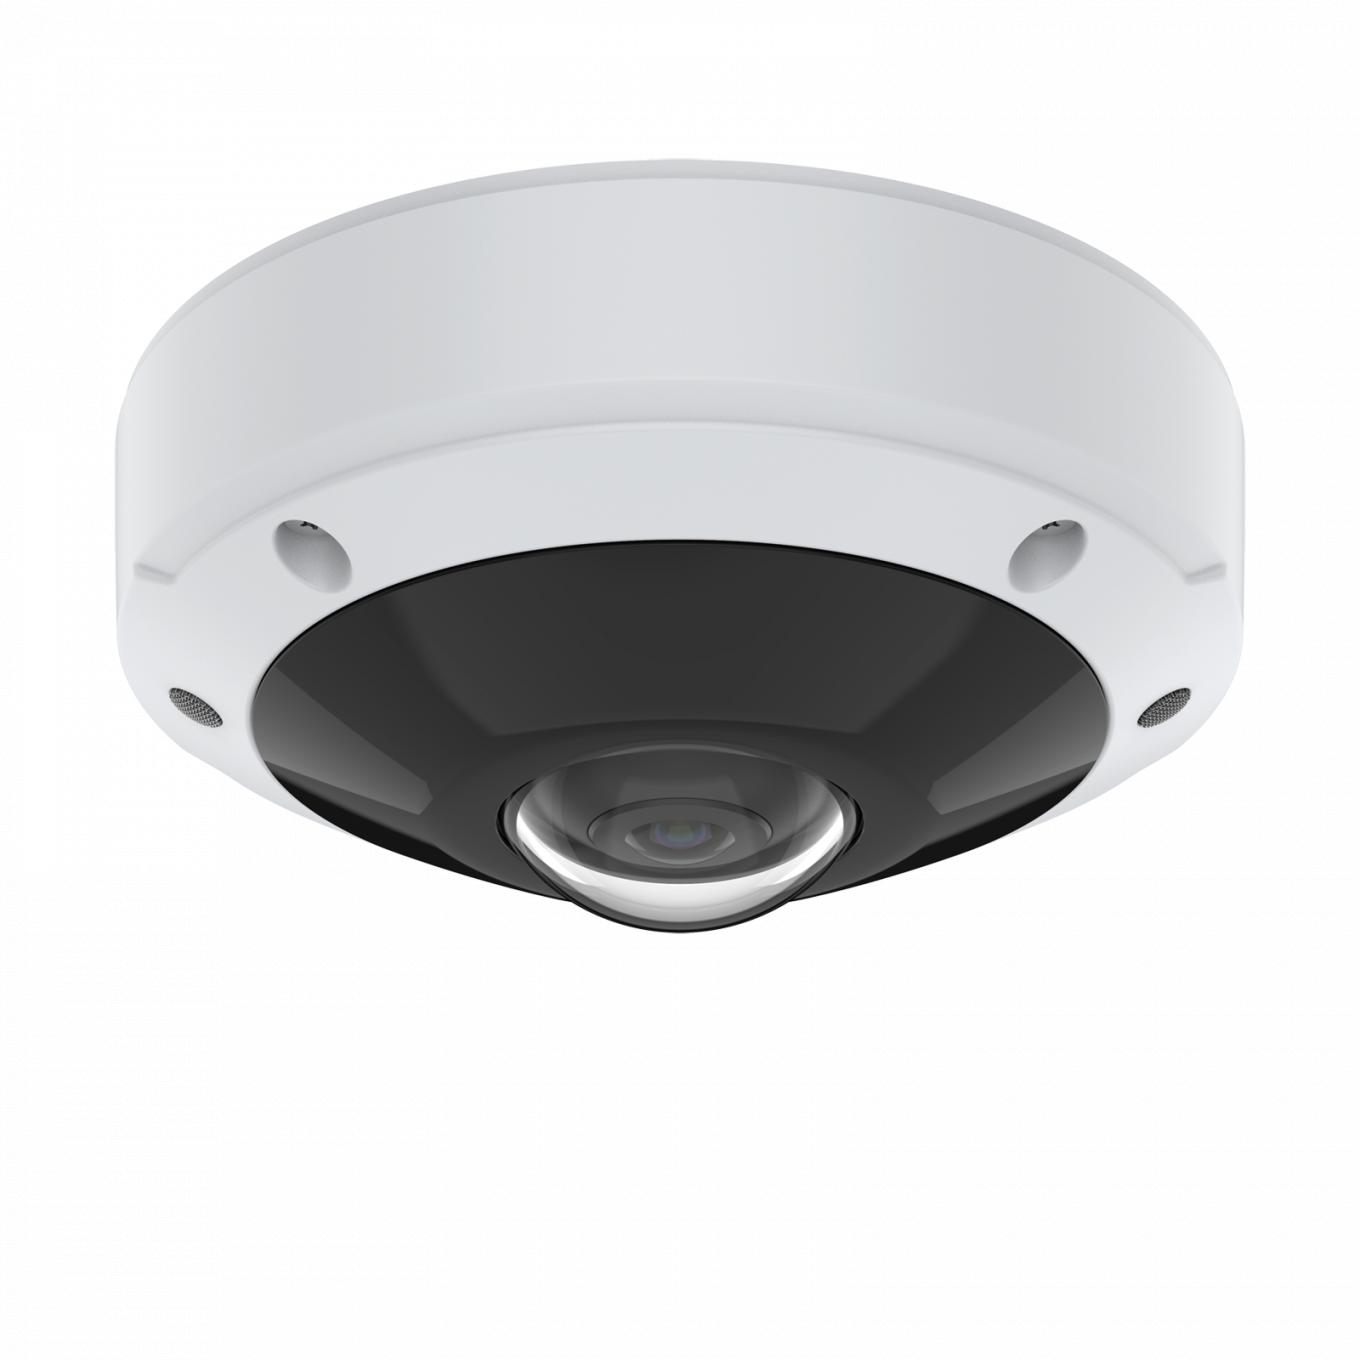 AXIS M3077-PLVE Network Camera | Axis Communications